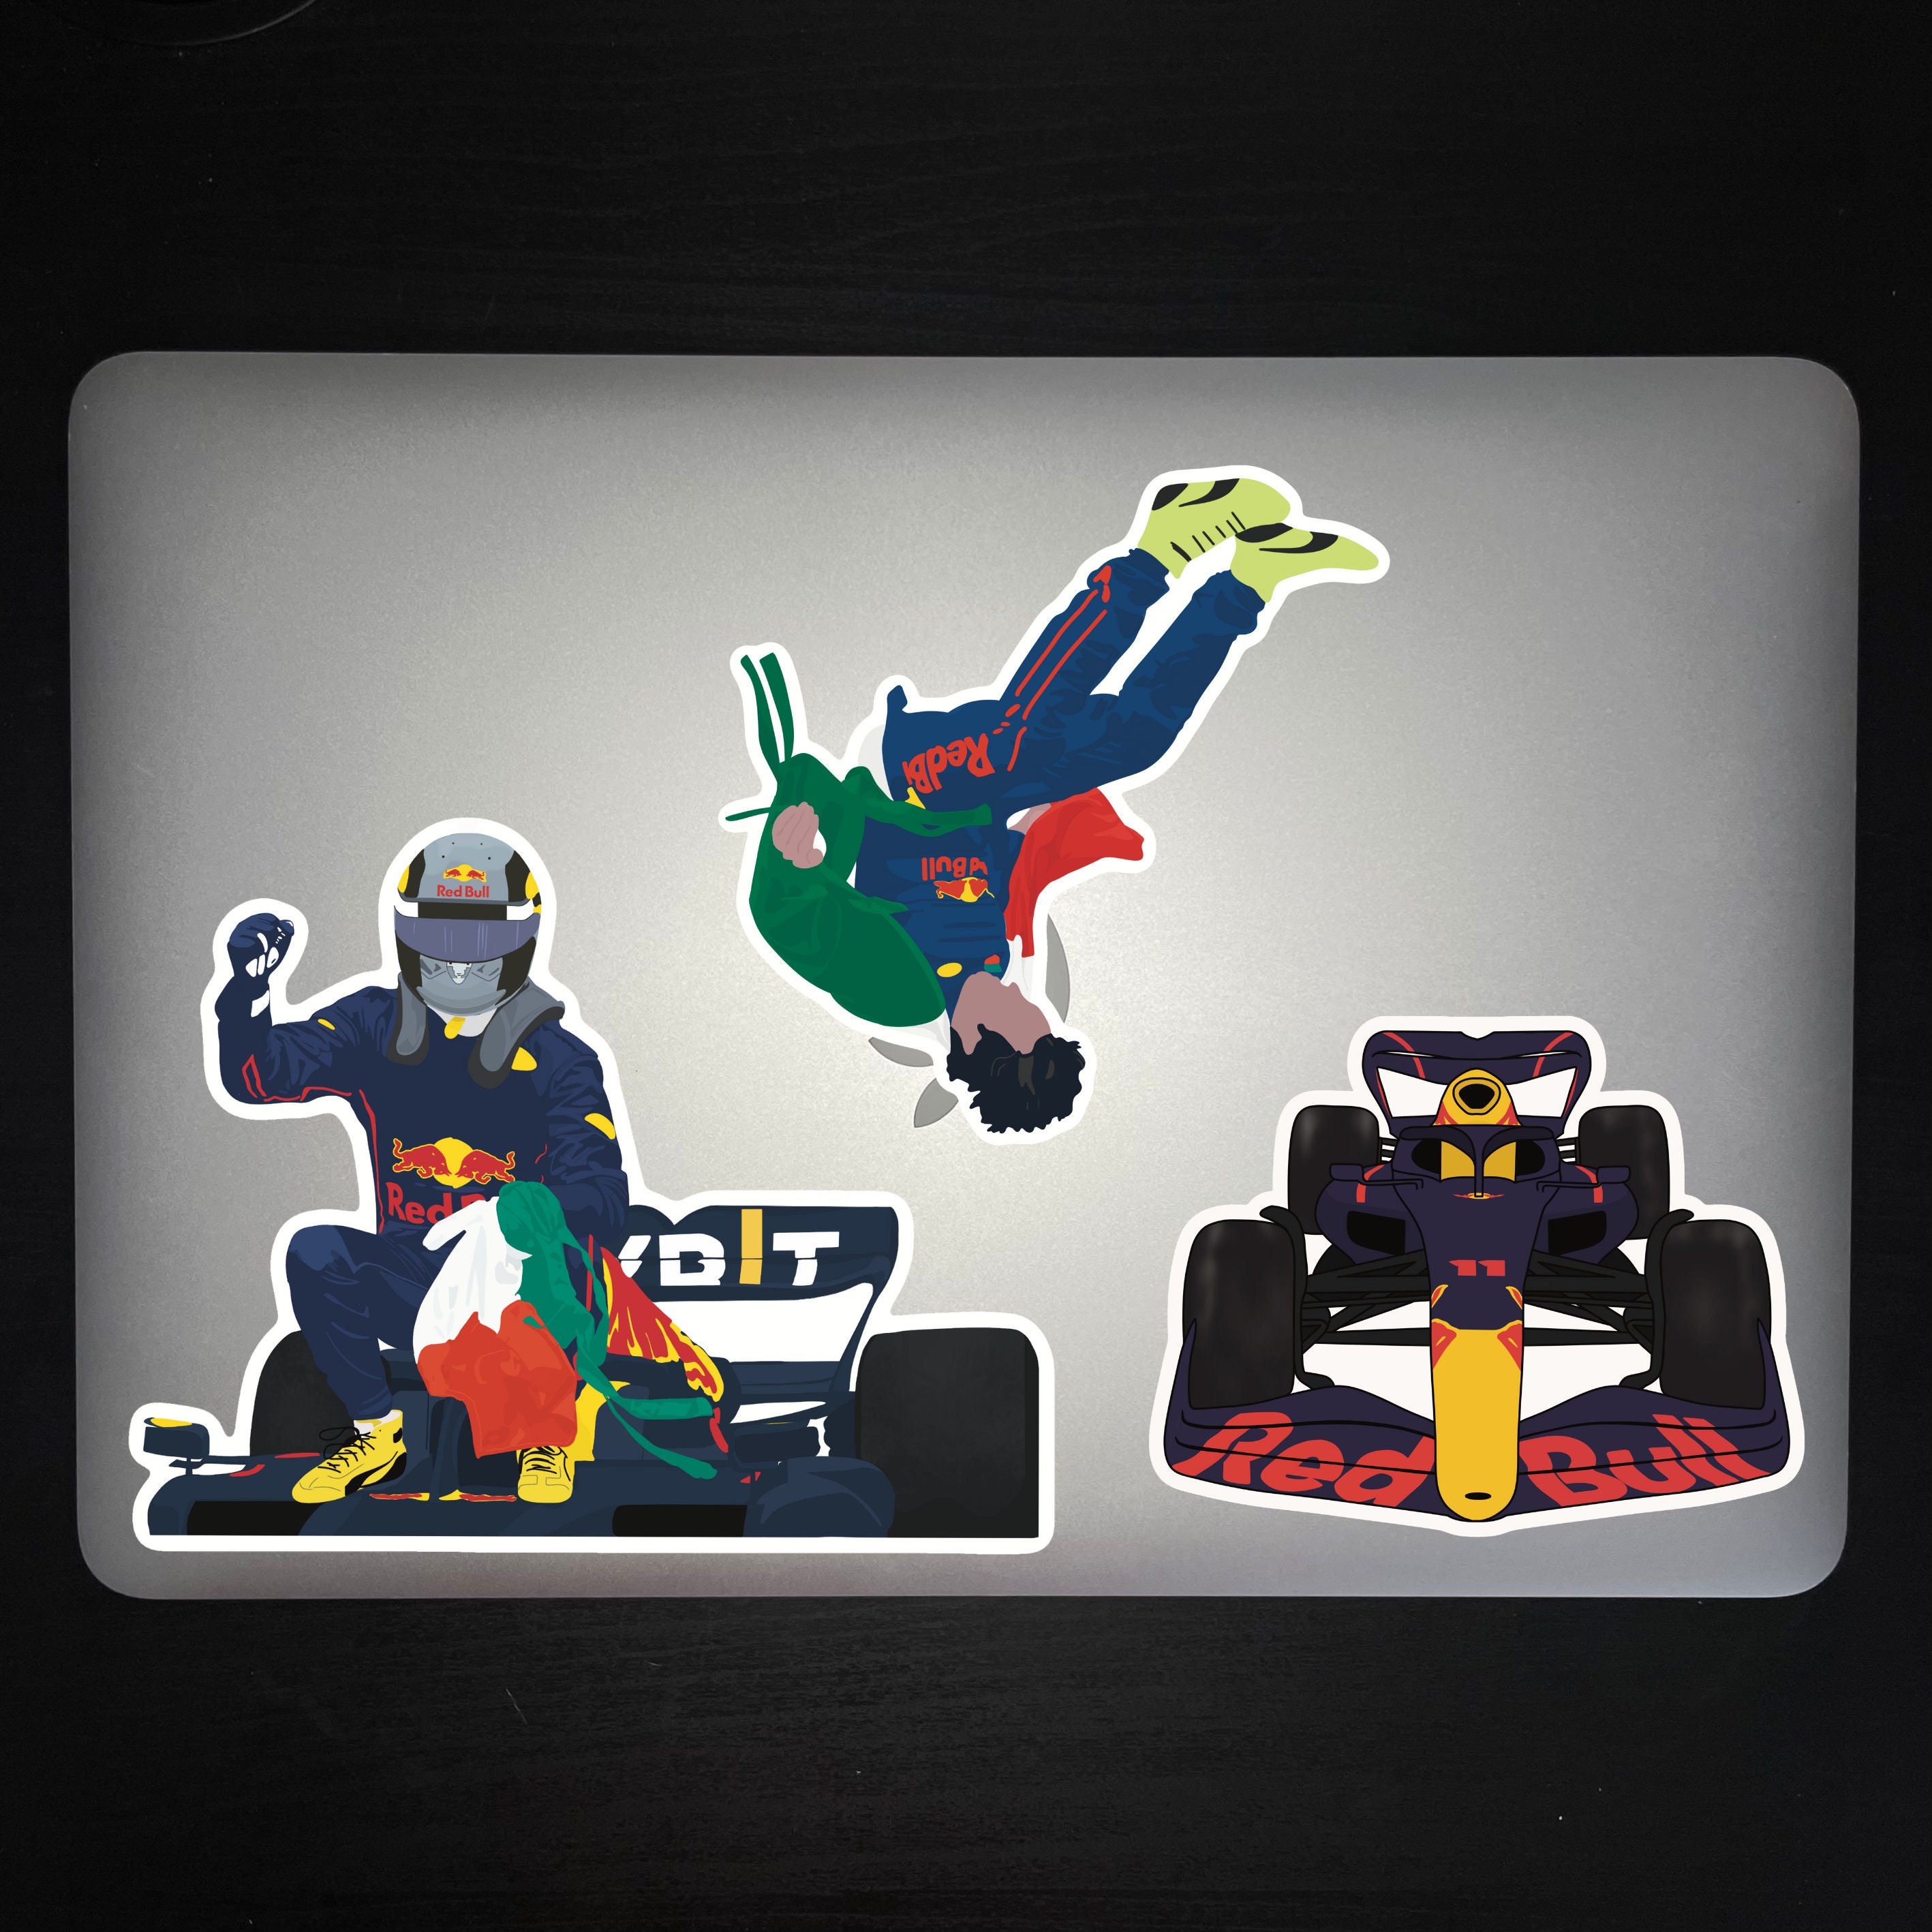 RED-BULL ENERGY DRINK STICKER✨🔥❤️‍🔥🔥❤️‍🔥🔥✨2 1/4” X 2 1/4✨AWESOME❤️‍🔥